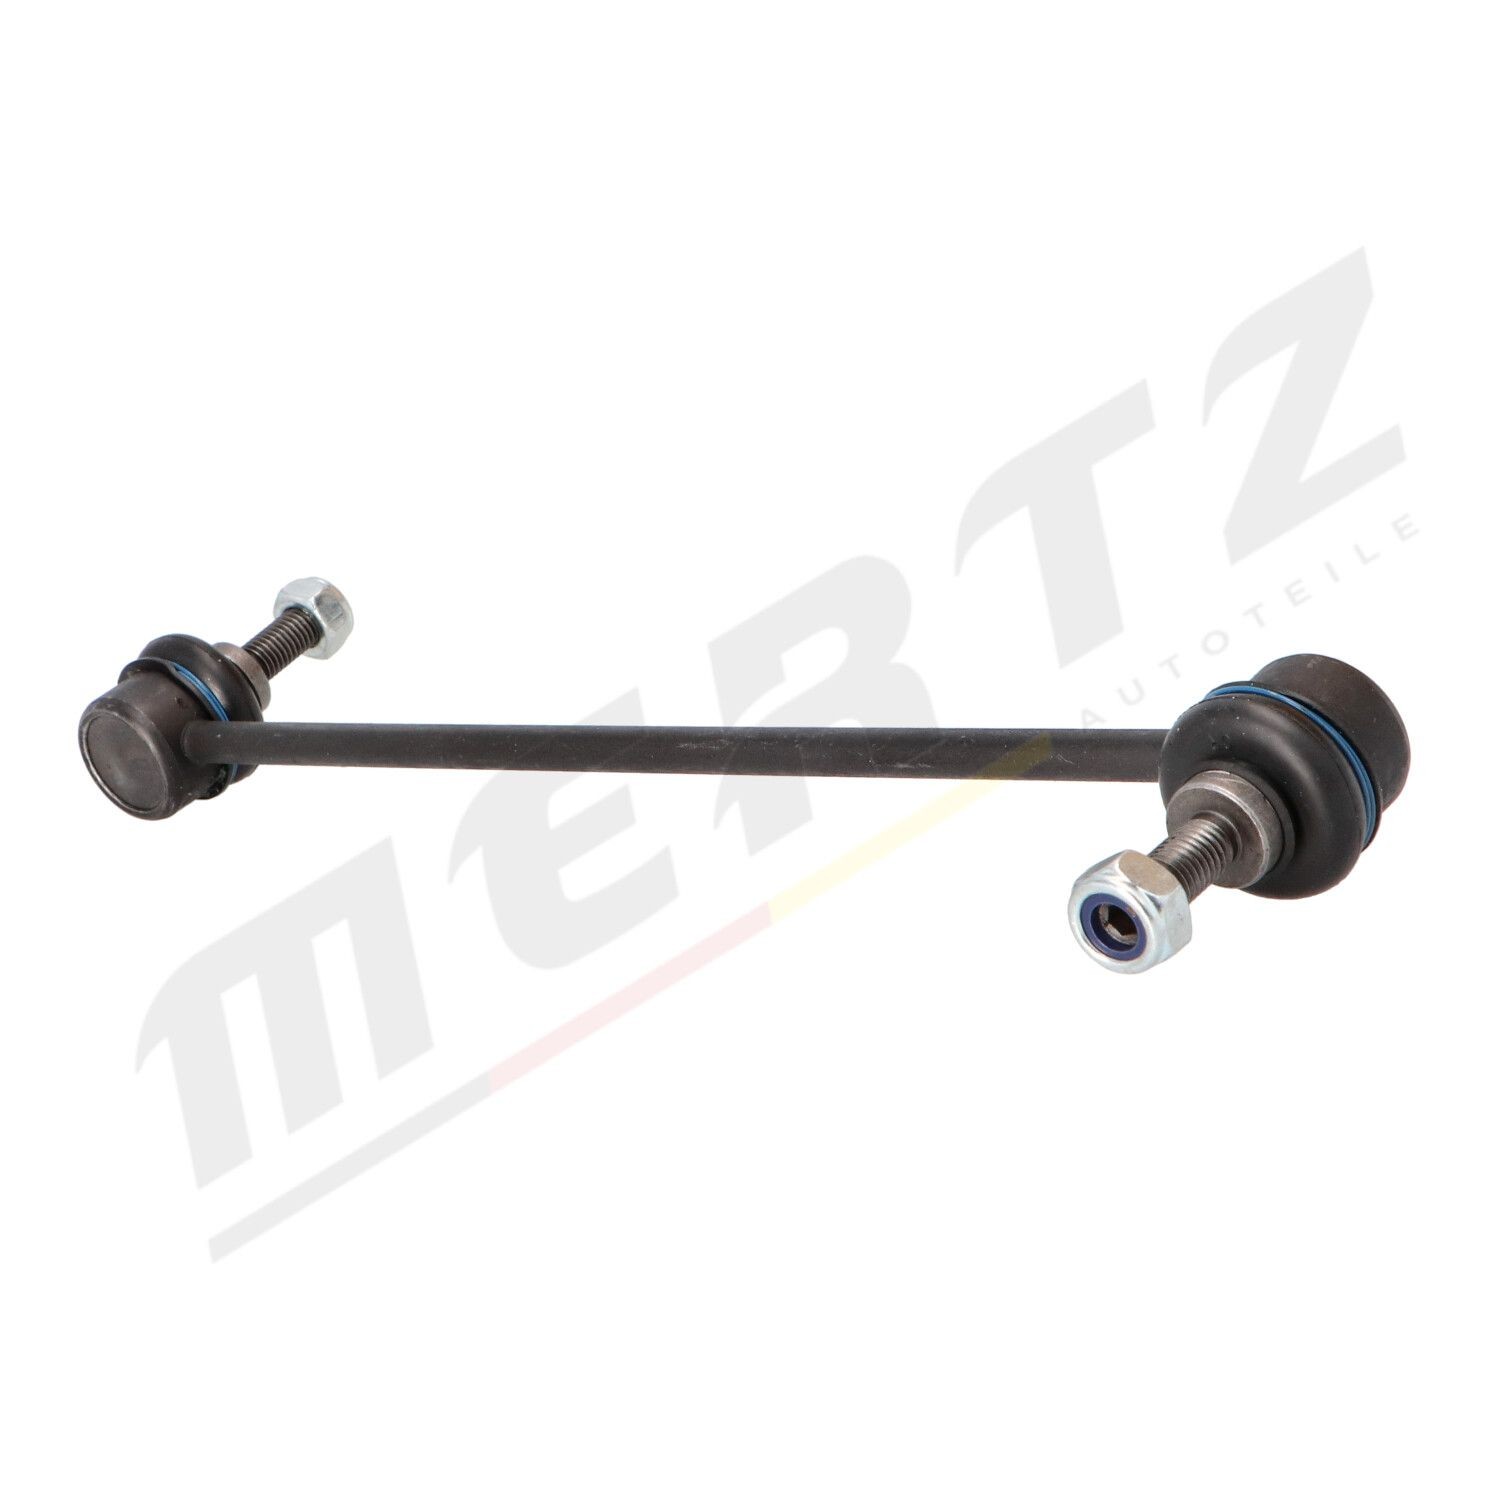 MS0366 Anti-roll bar links MERTZ M-S0366 review and test